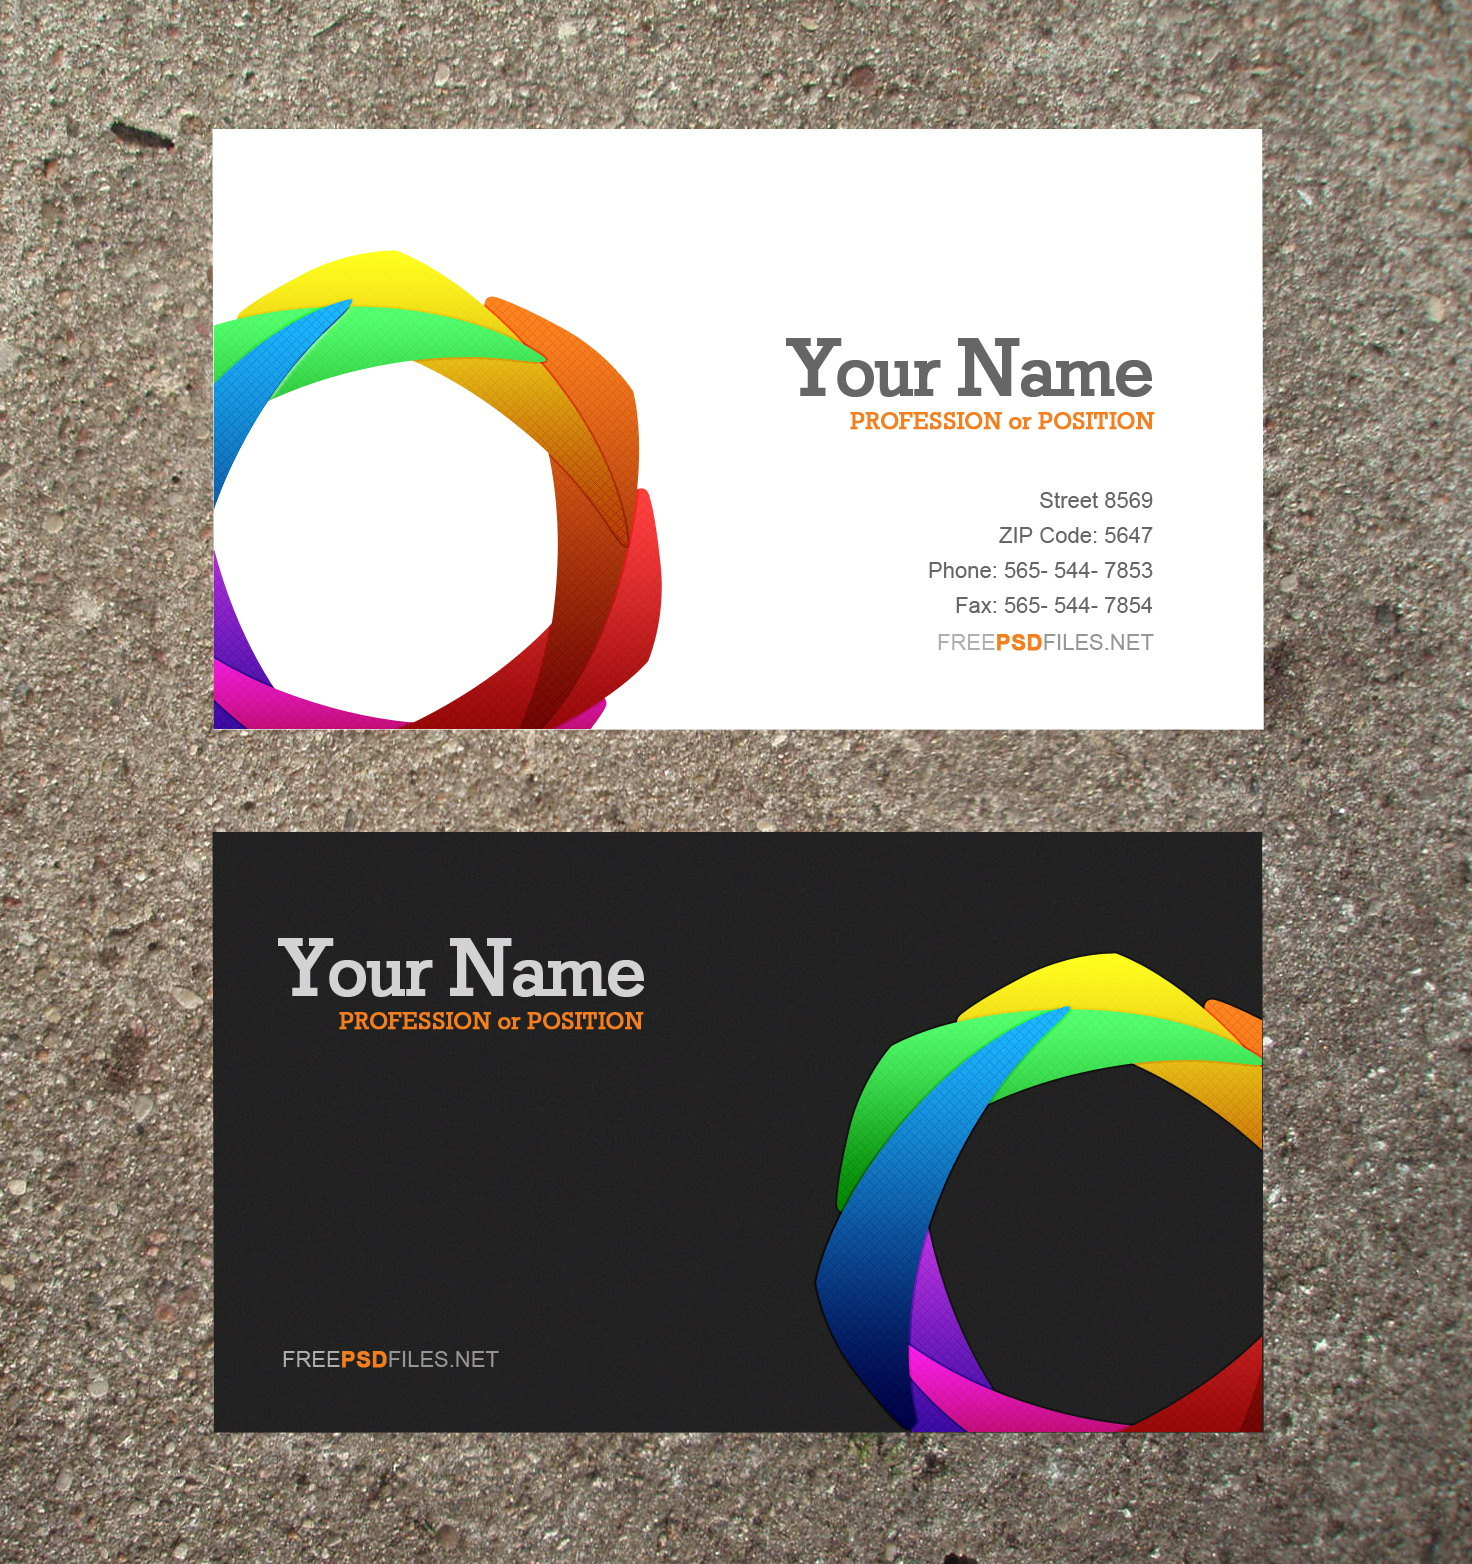 Business Card Free Templates Download | Business Card Sample In Blank Business Card Template Download